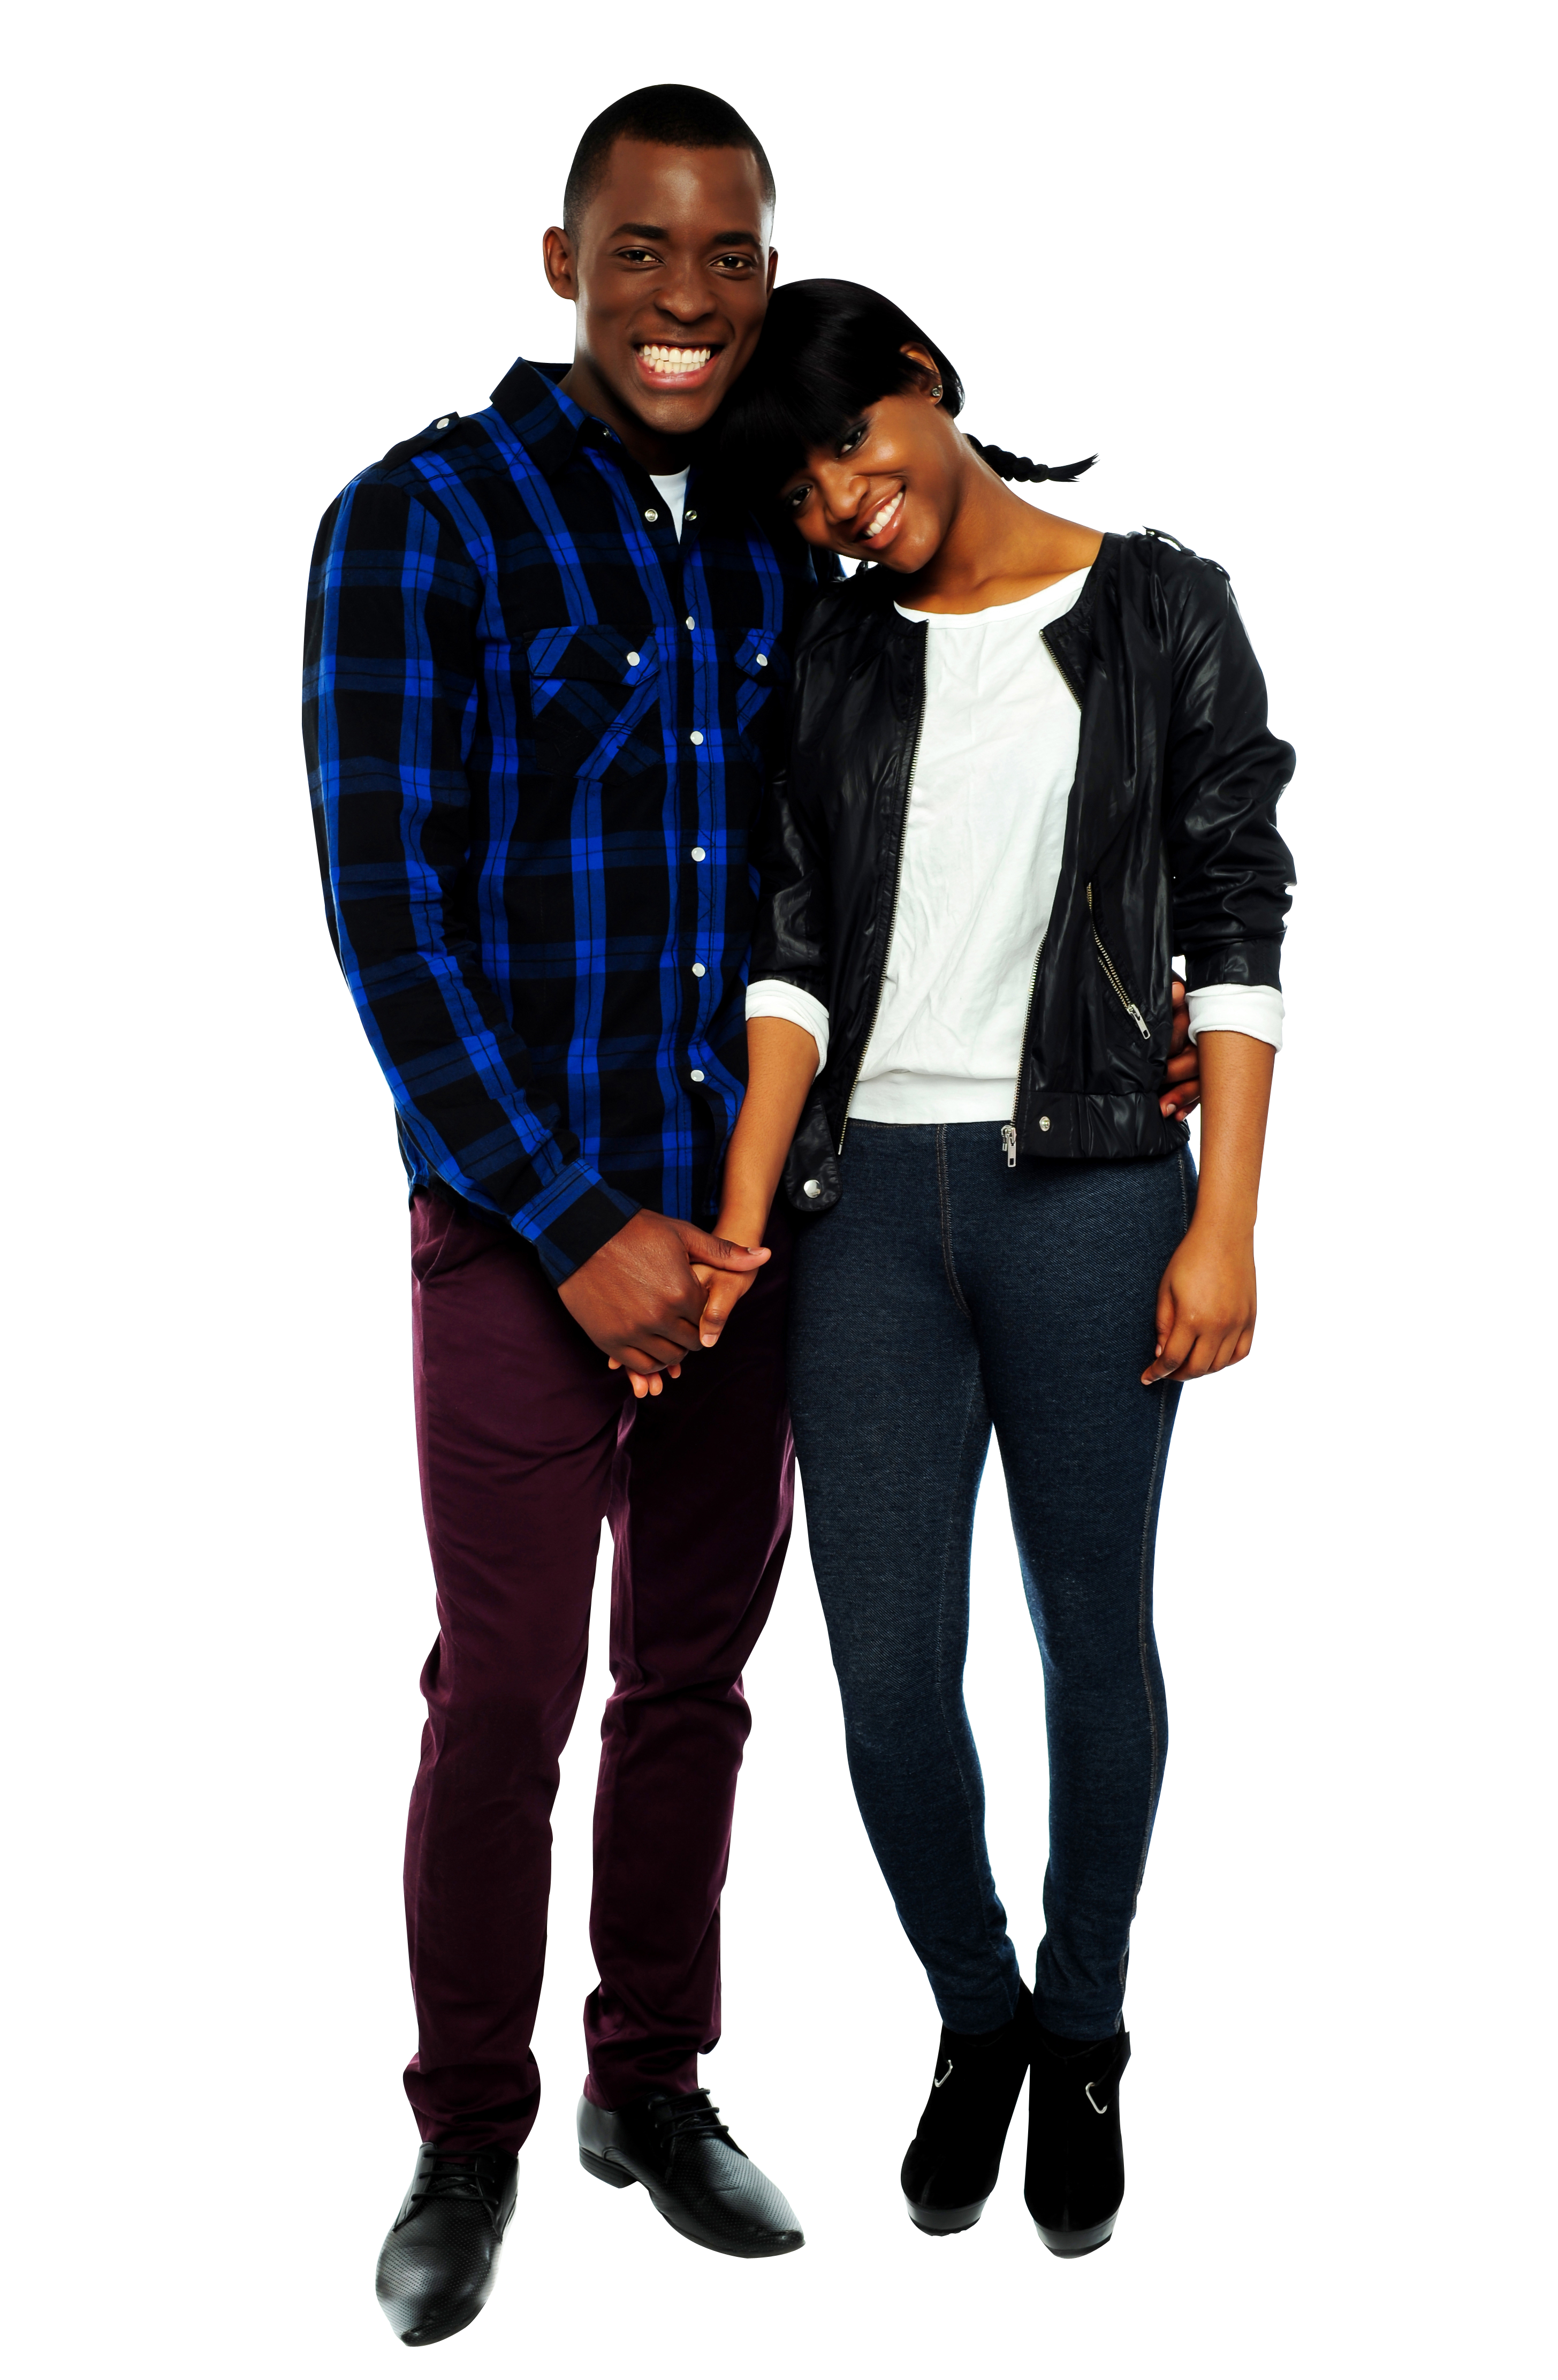 Download Love Couple PNG Image for Free